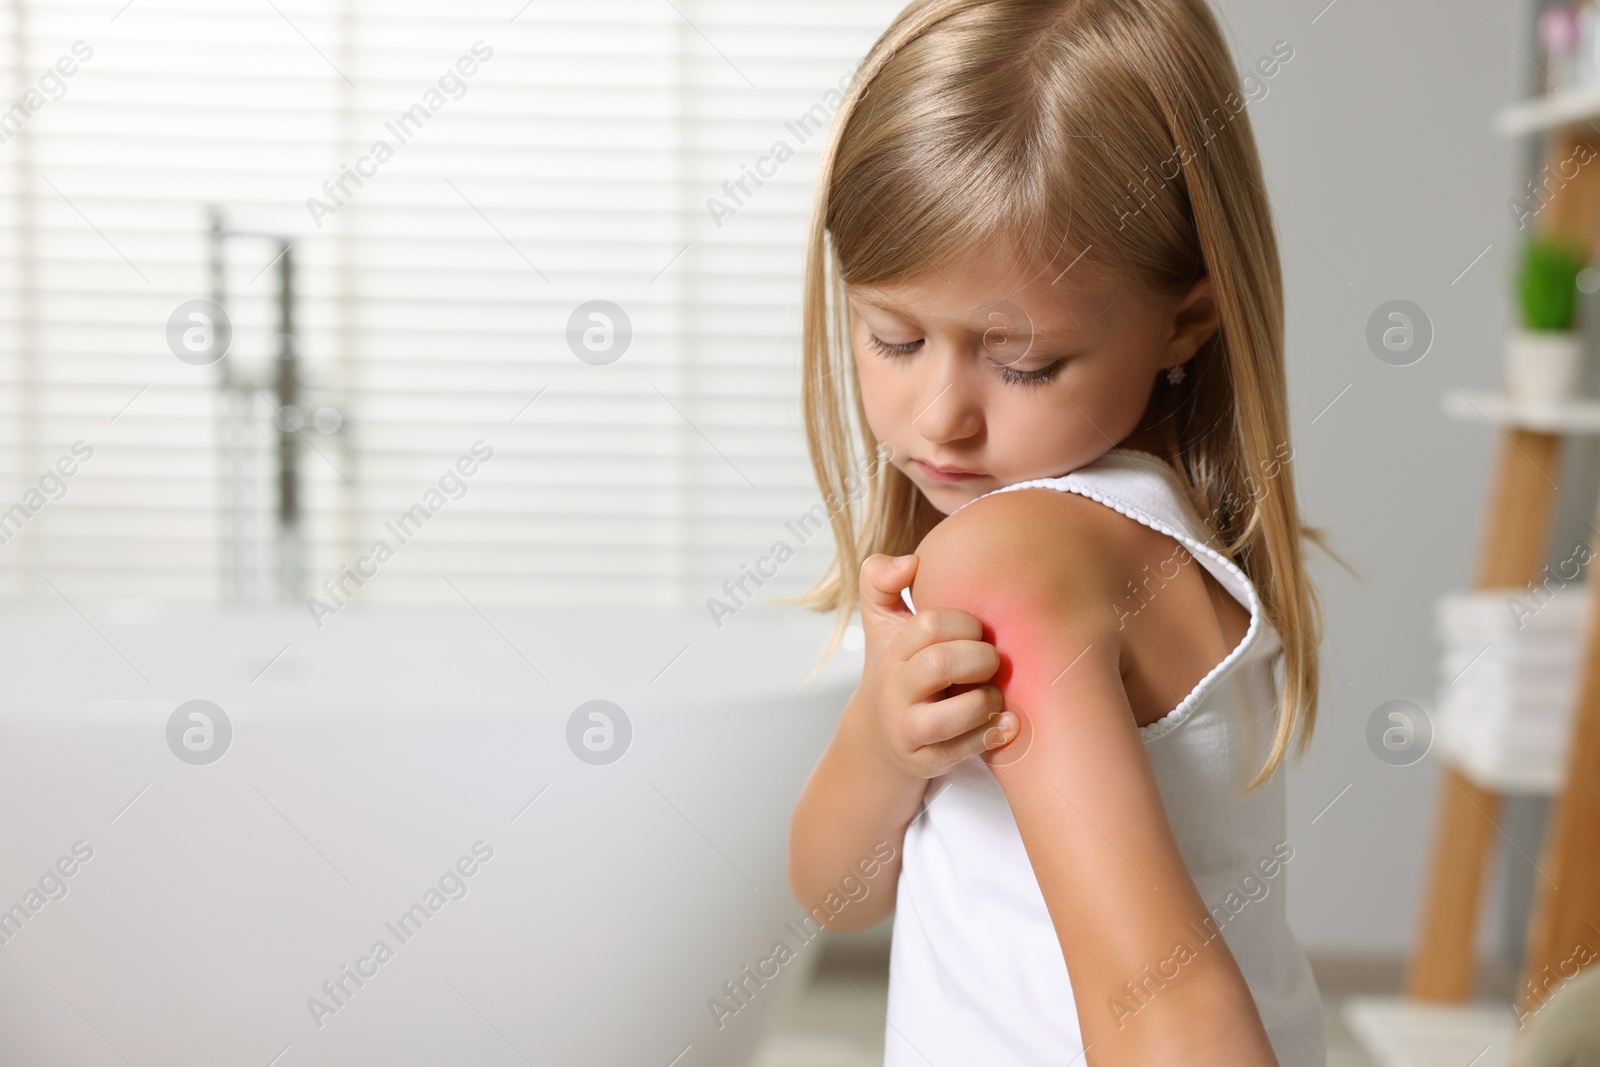 Photo of Suffering from allergy. Little girl scratching her shoulder in bathroom, space for text